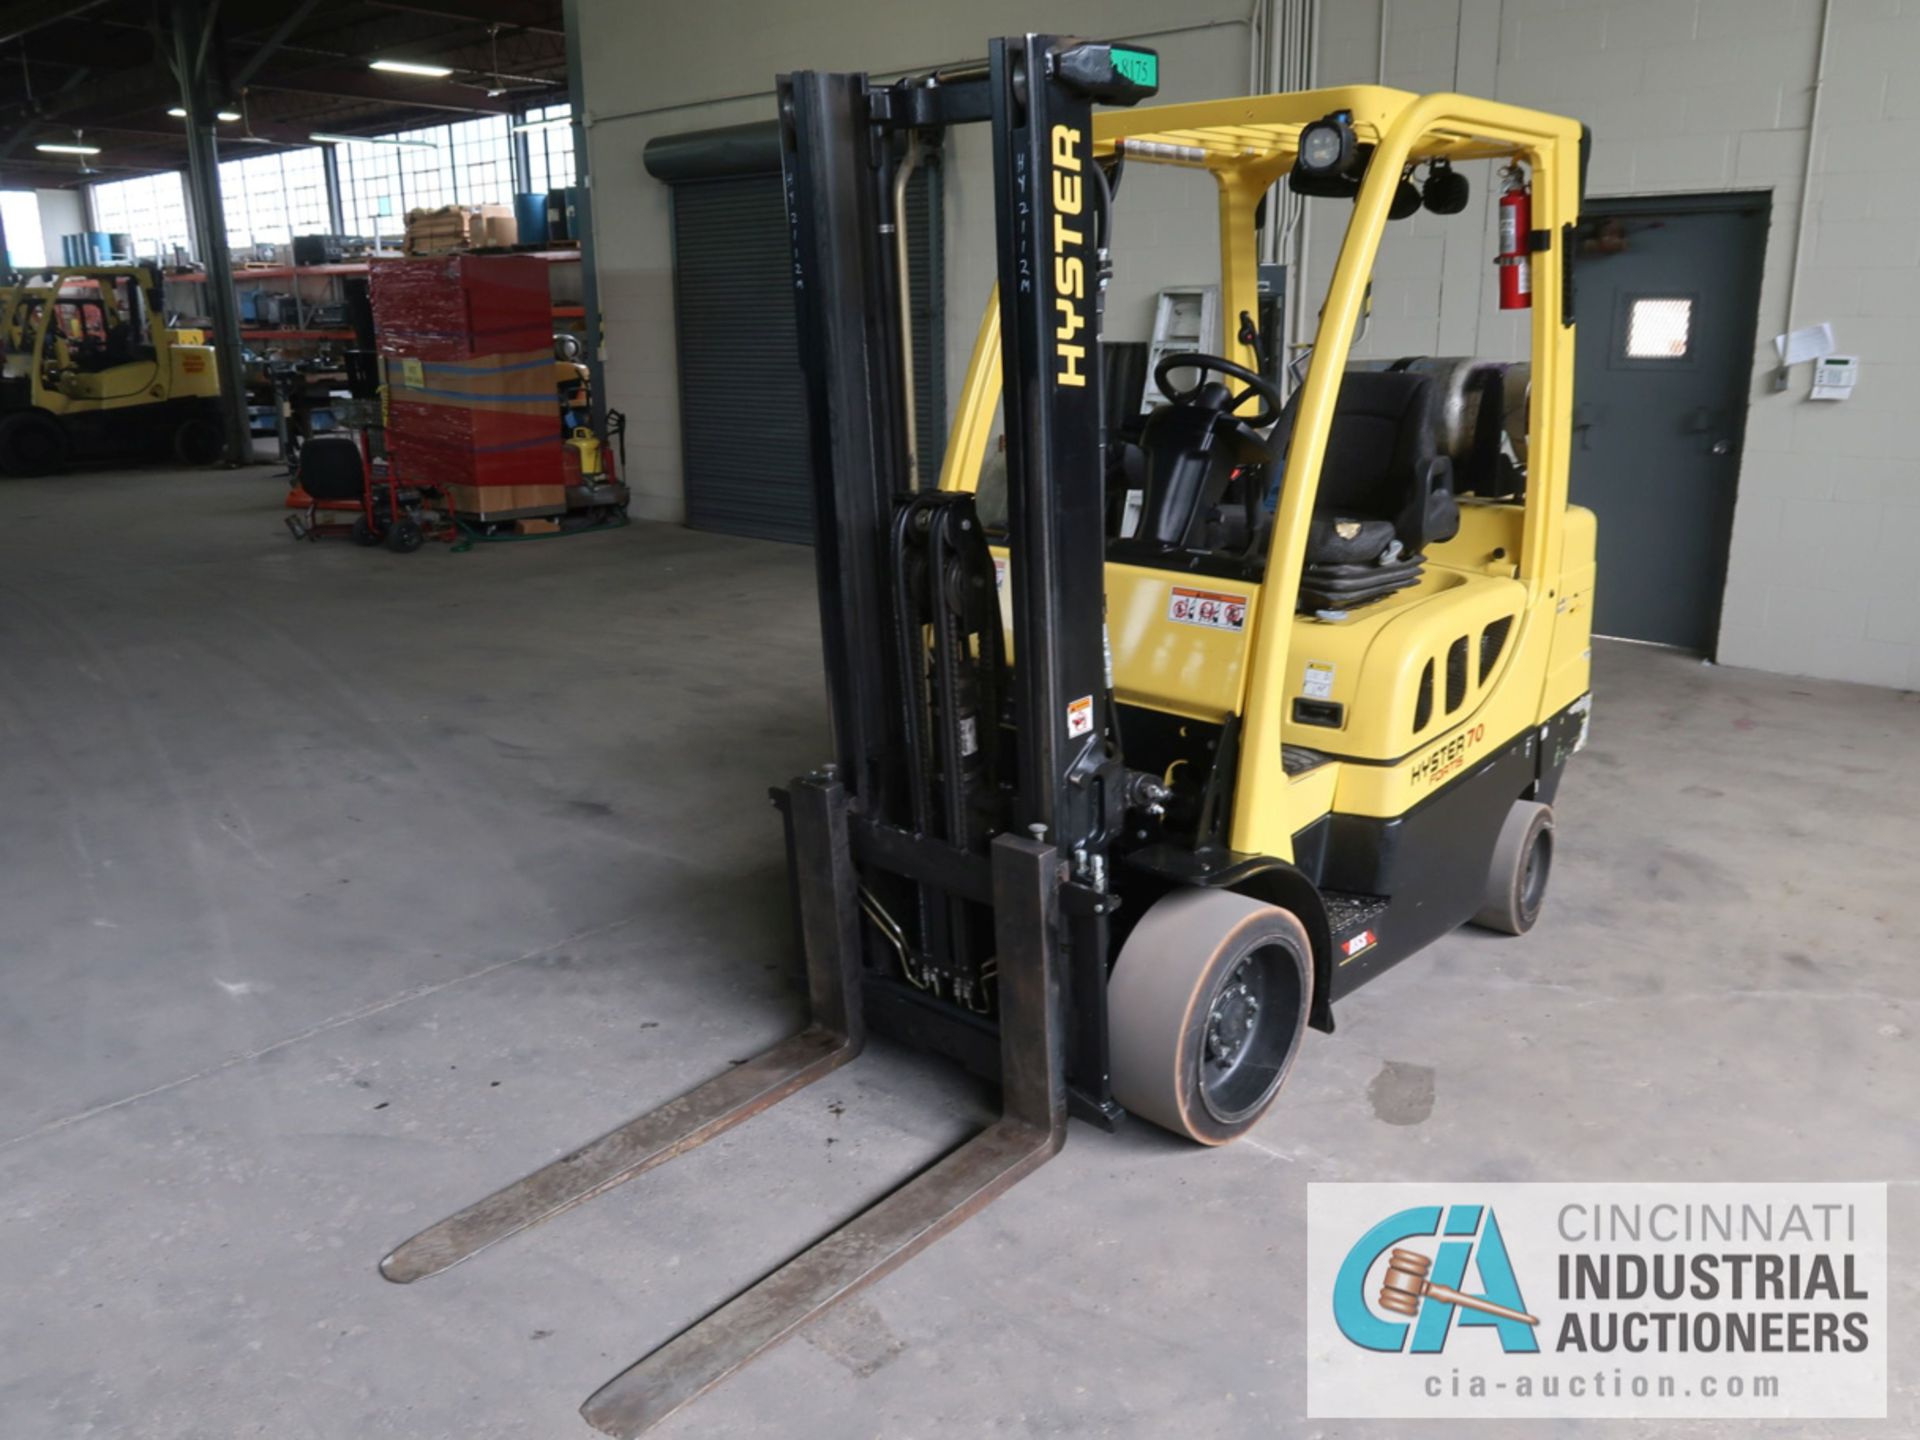 7,000 LB HYSTER MODEL S70FT LP GAS SOLID TIRE LIFT TRUCK WITH 2-STAGE MAST, 122" LIFT HEIGHT, 80"